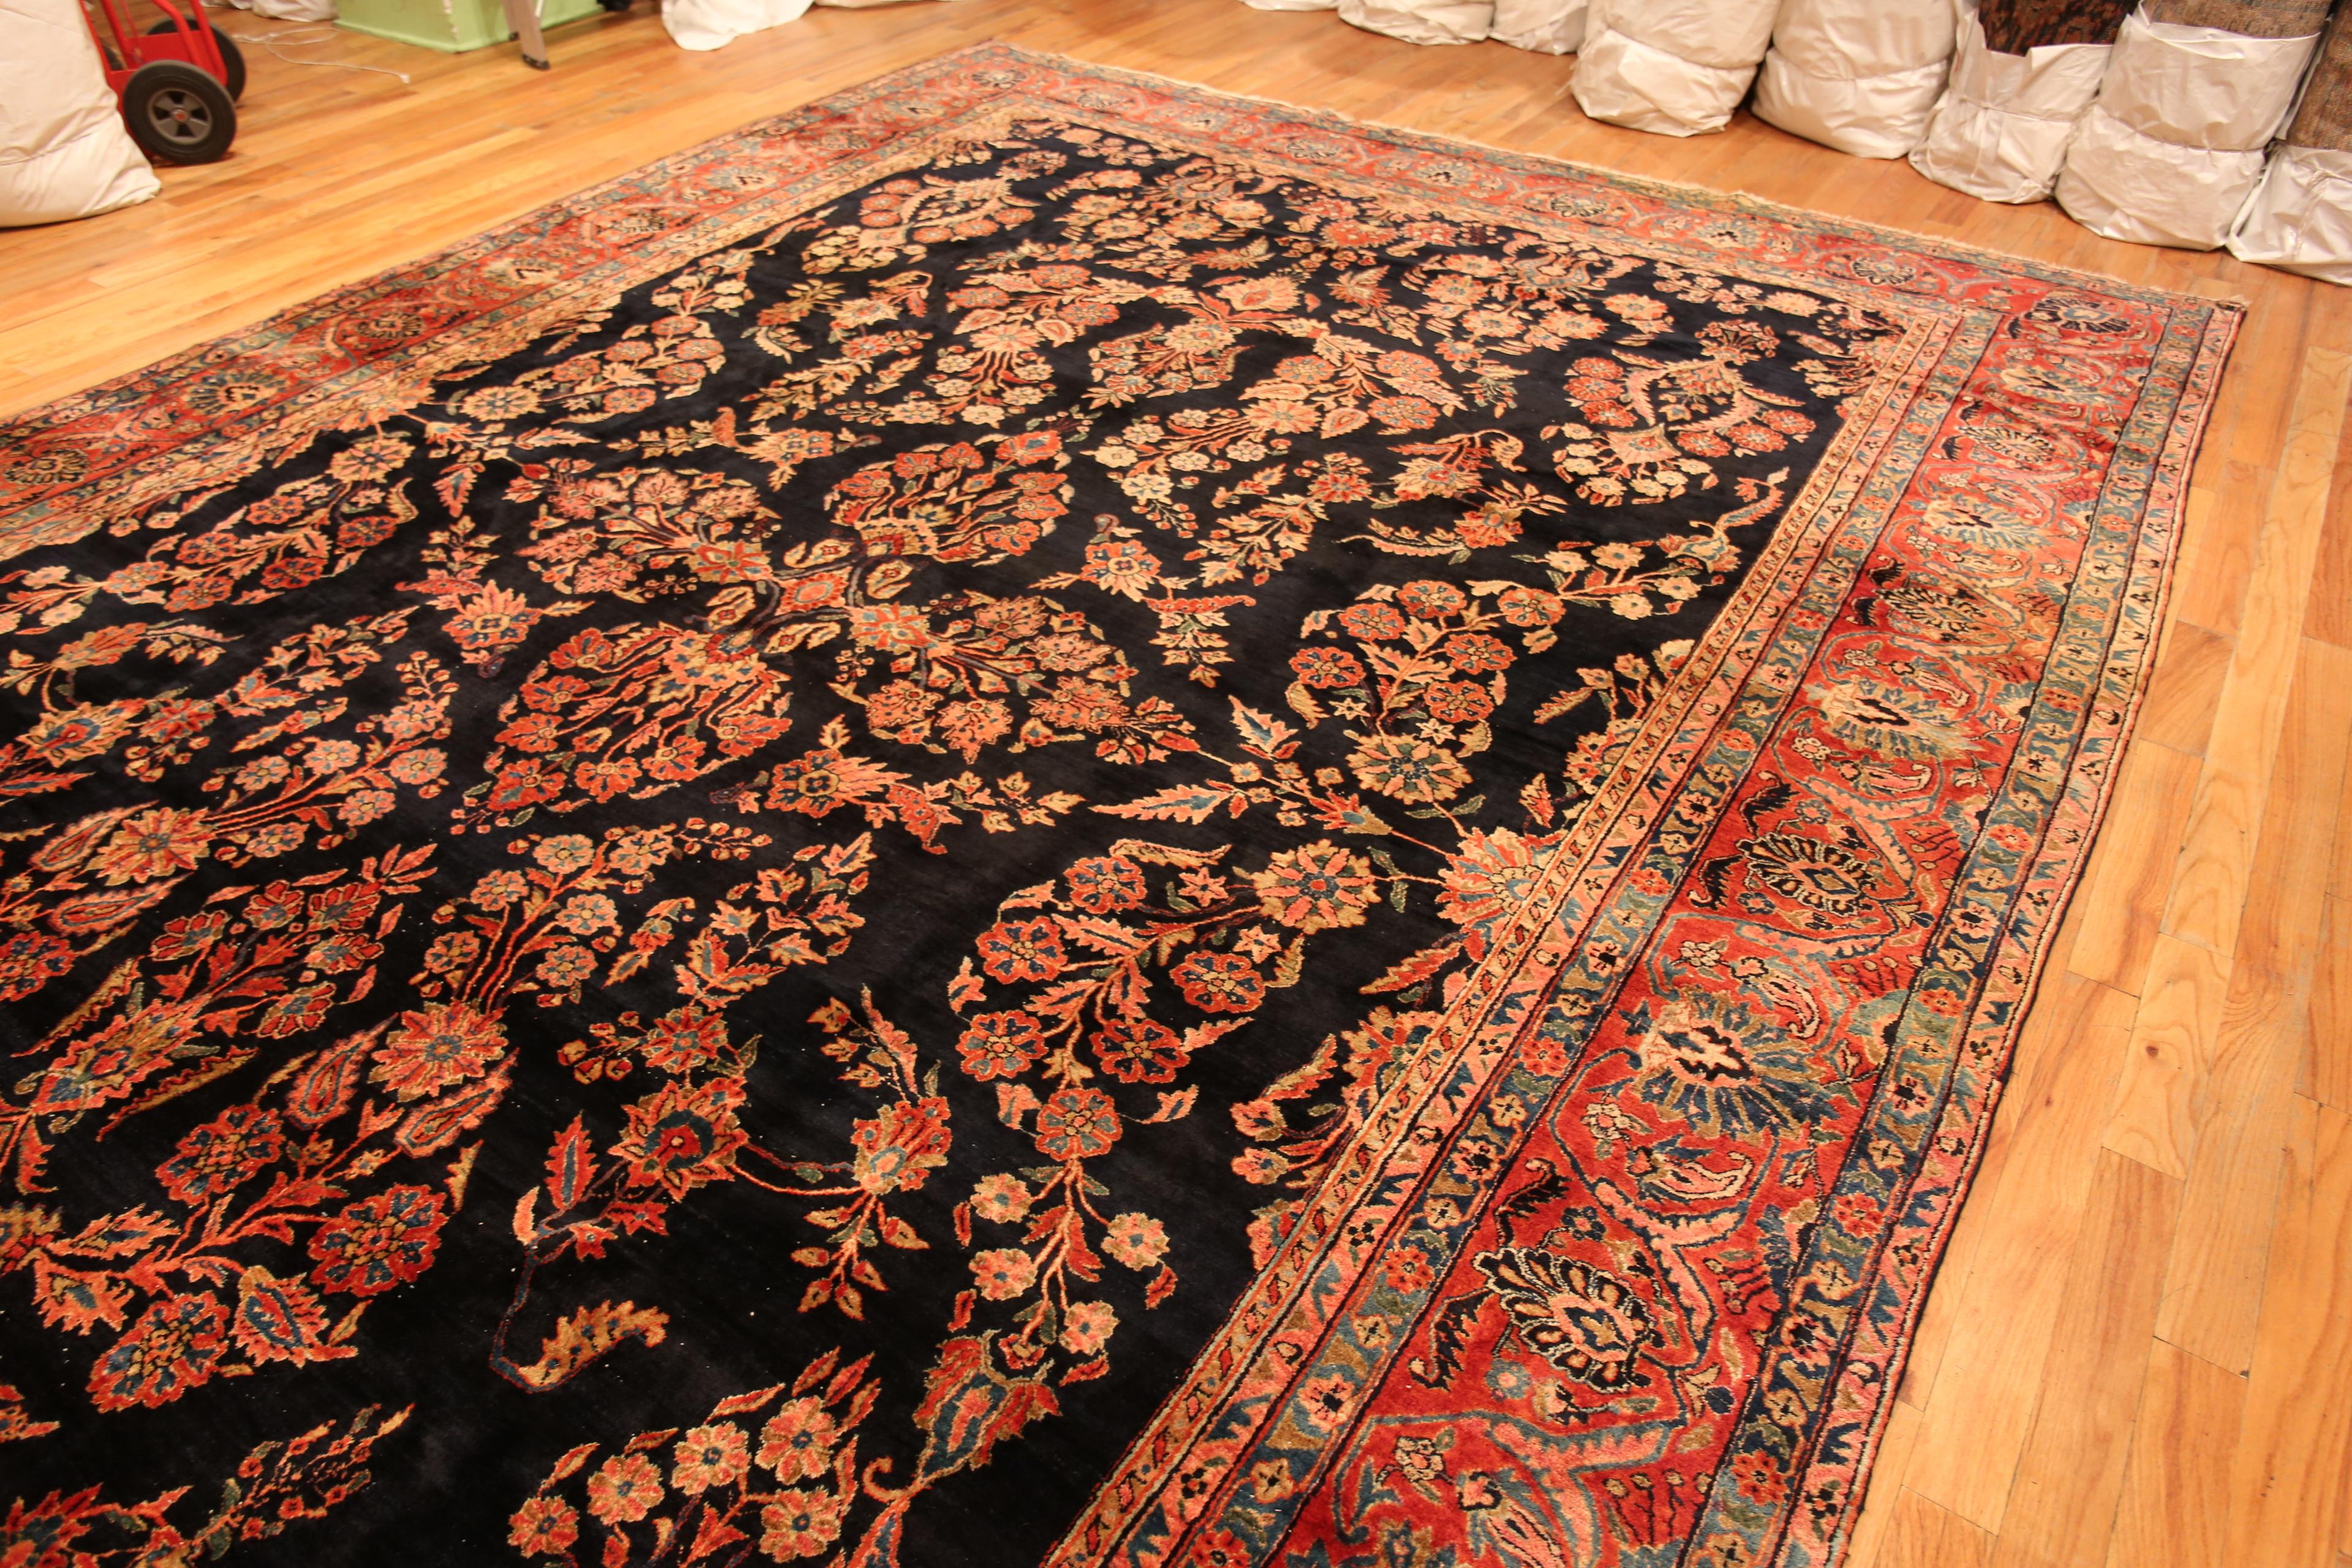 Hand-Knotted Antique Rustic Persian Sarouk Rug. 11 ft 4 in x 17 ft 4 in